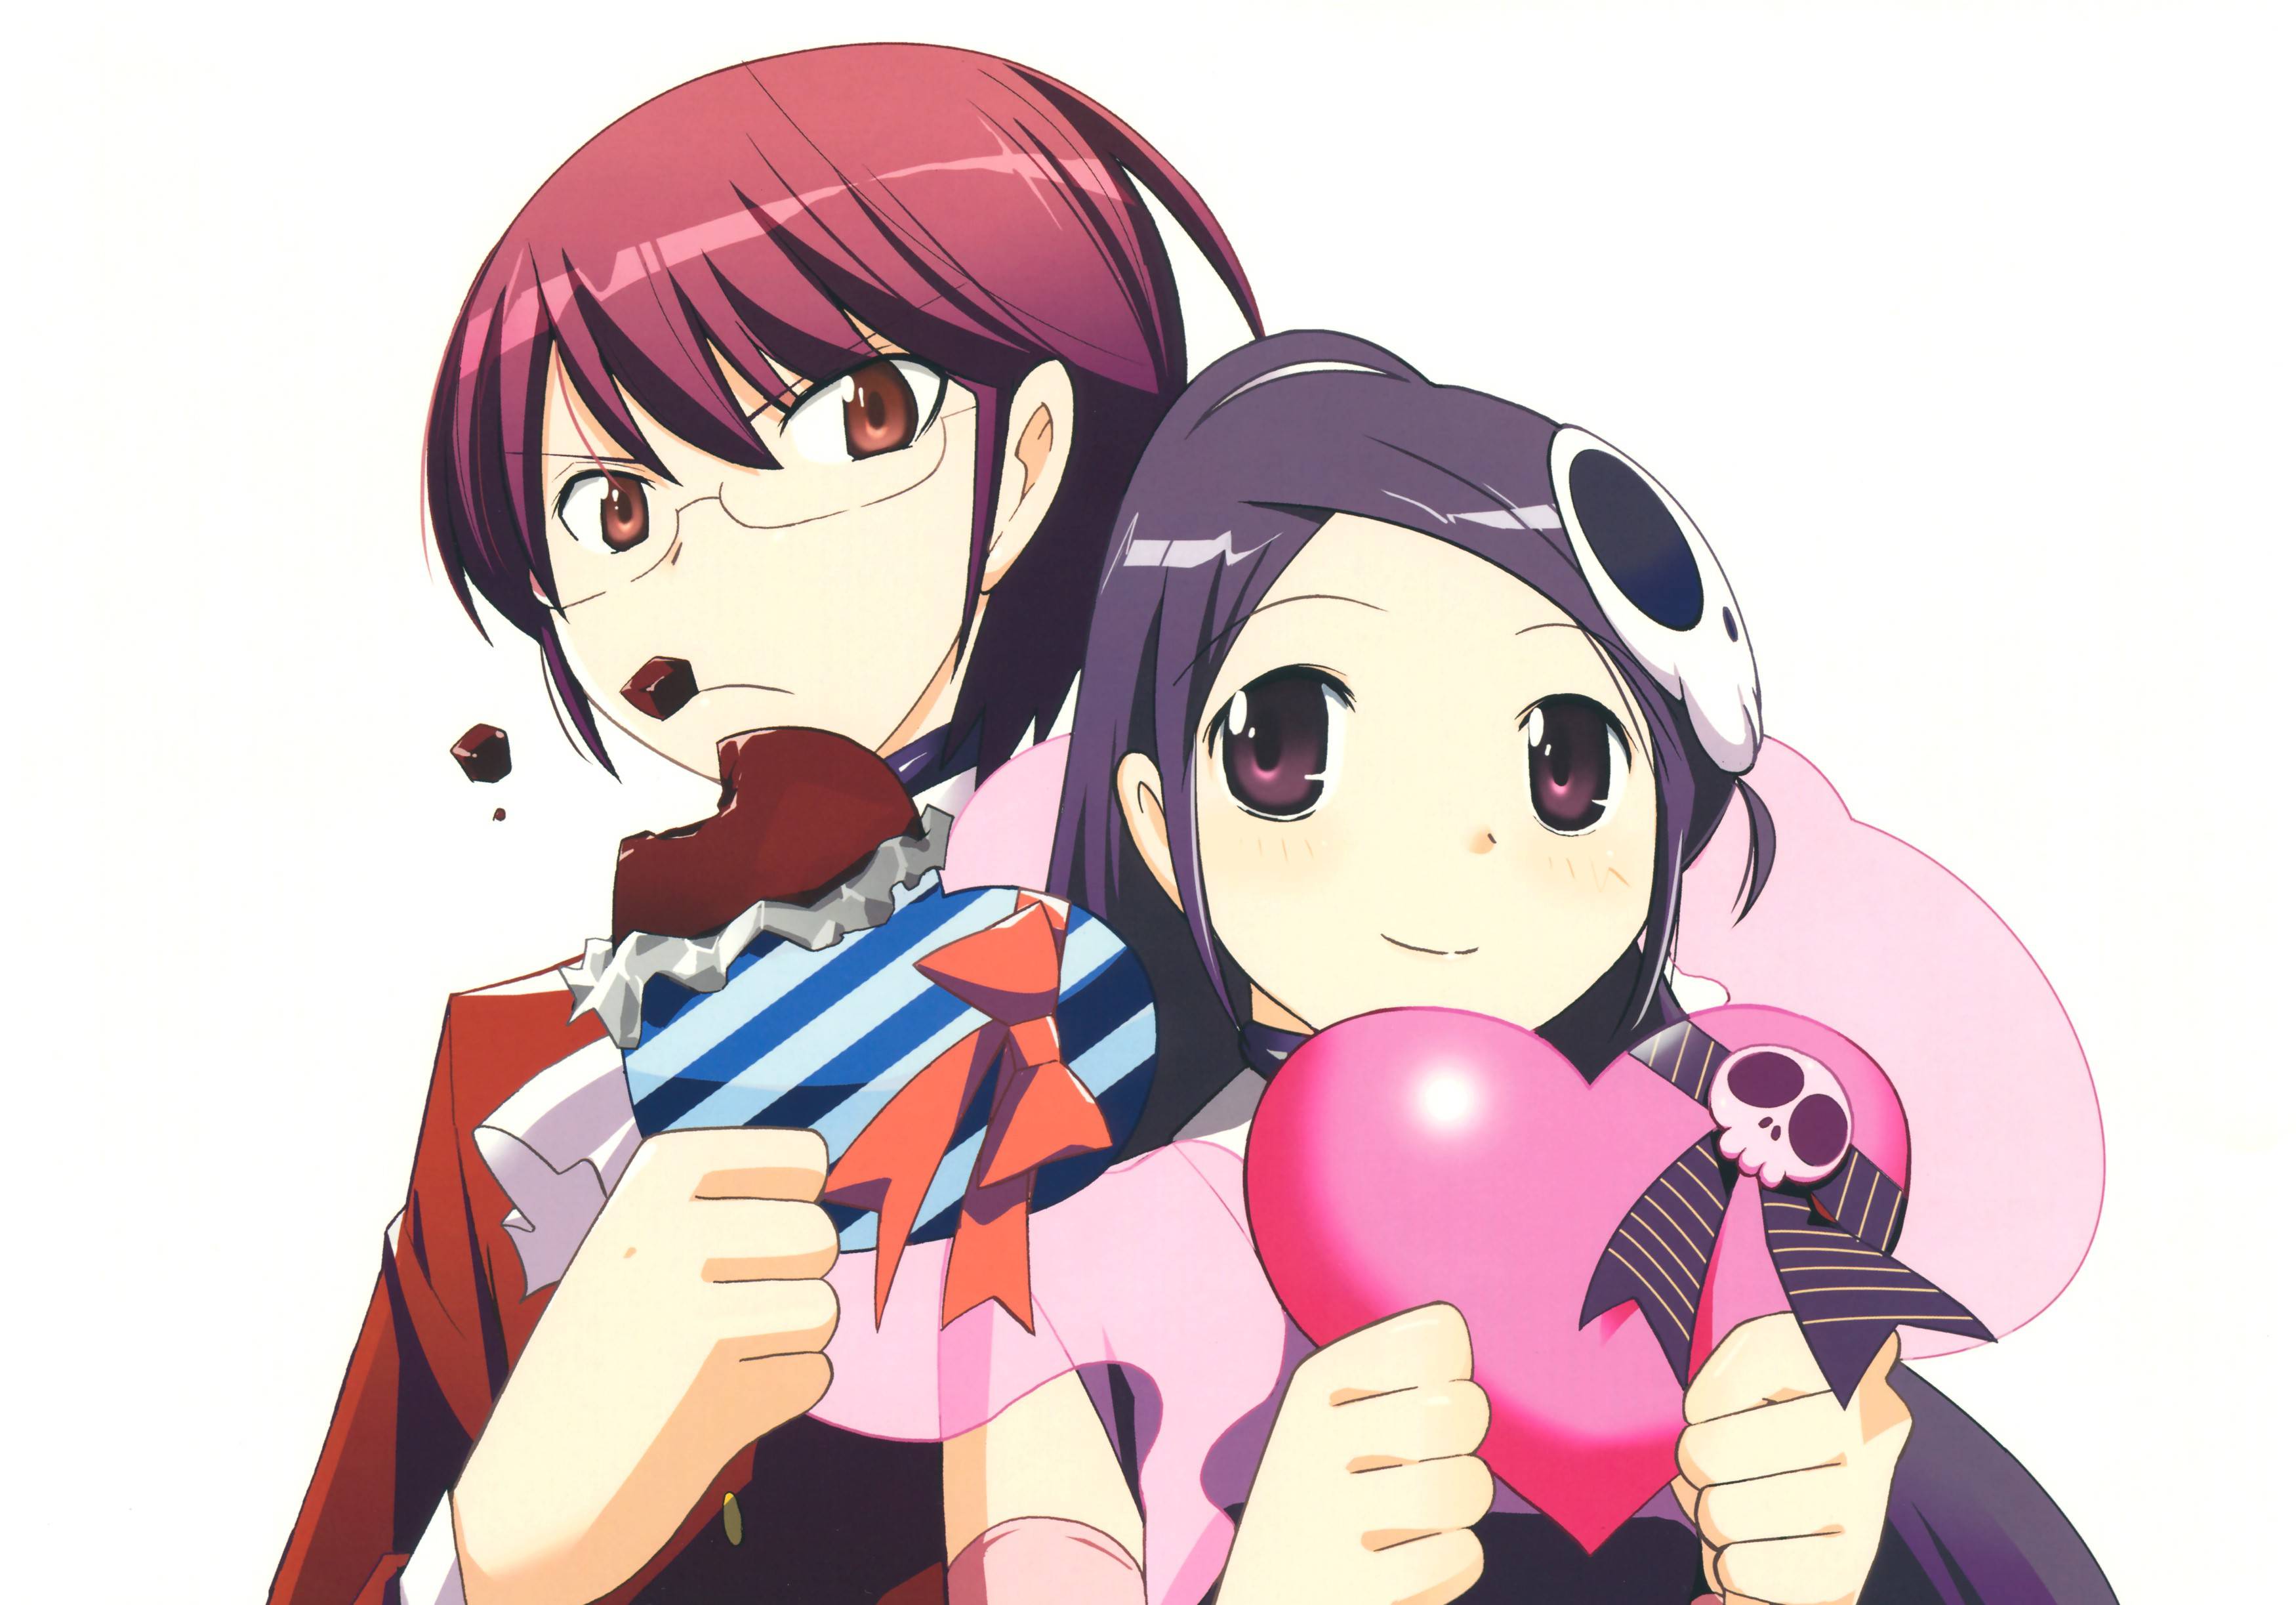 The world god only knows wallpaper - (#21491) - High Quality and ...